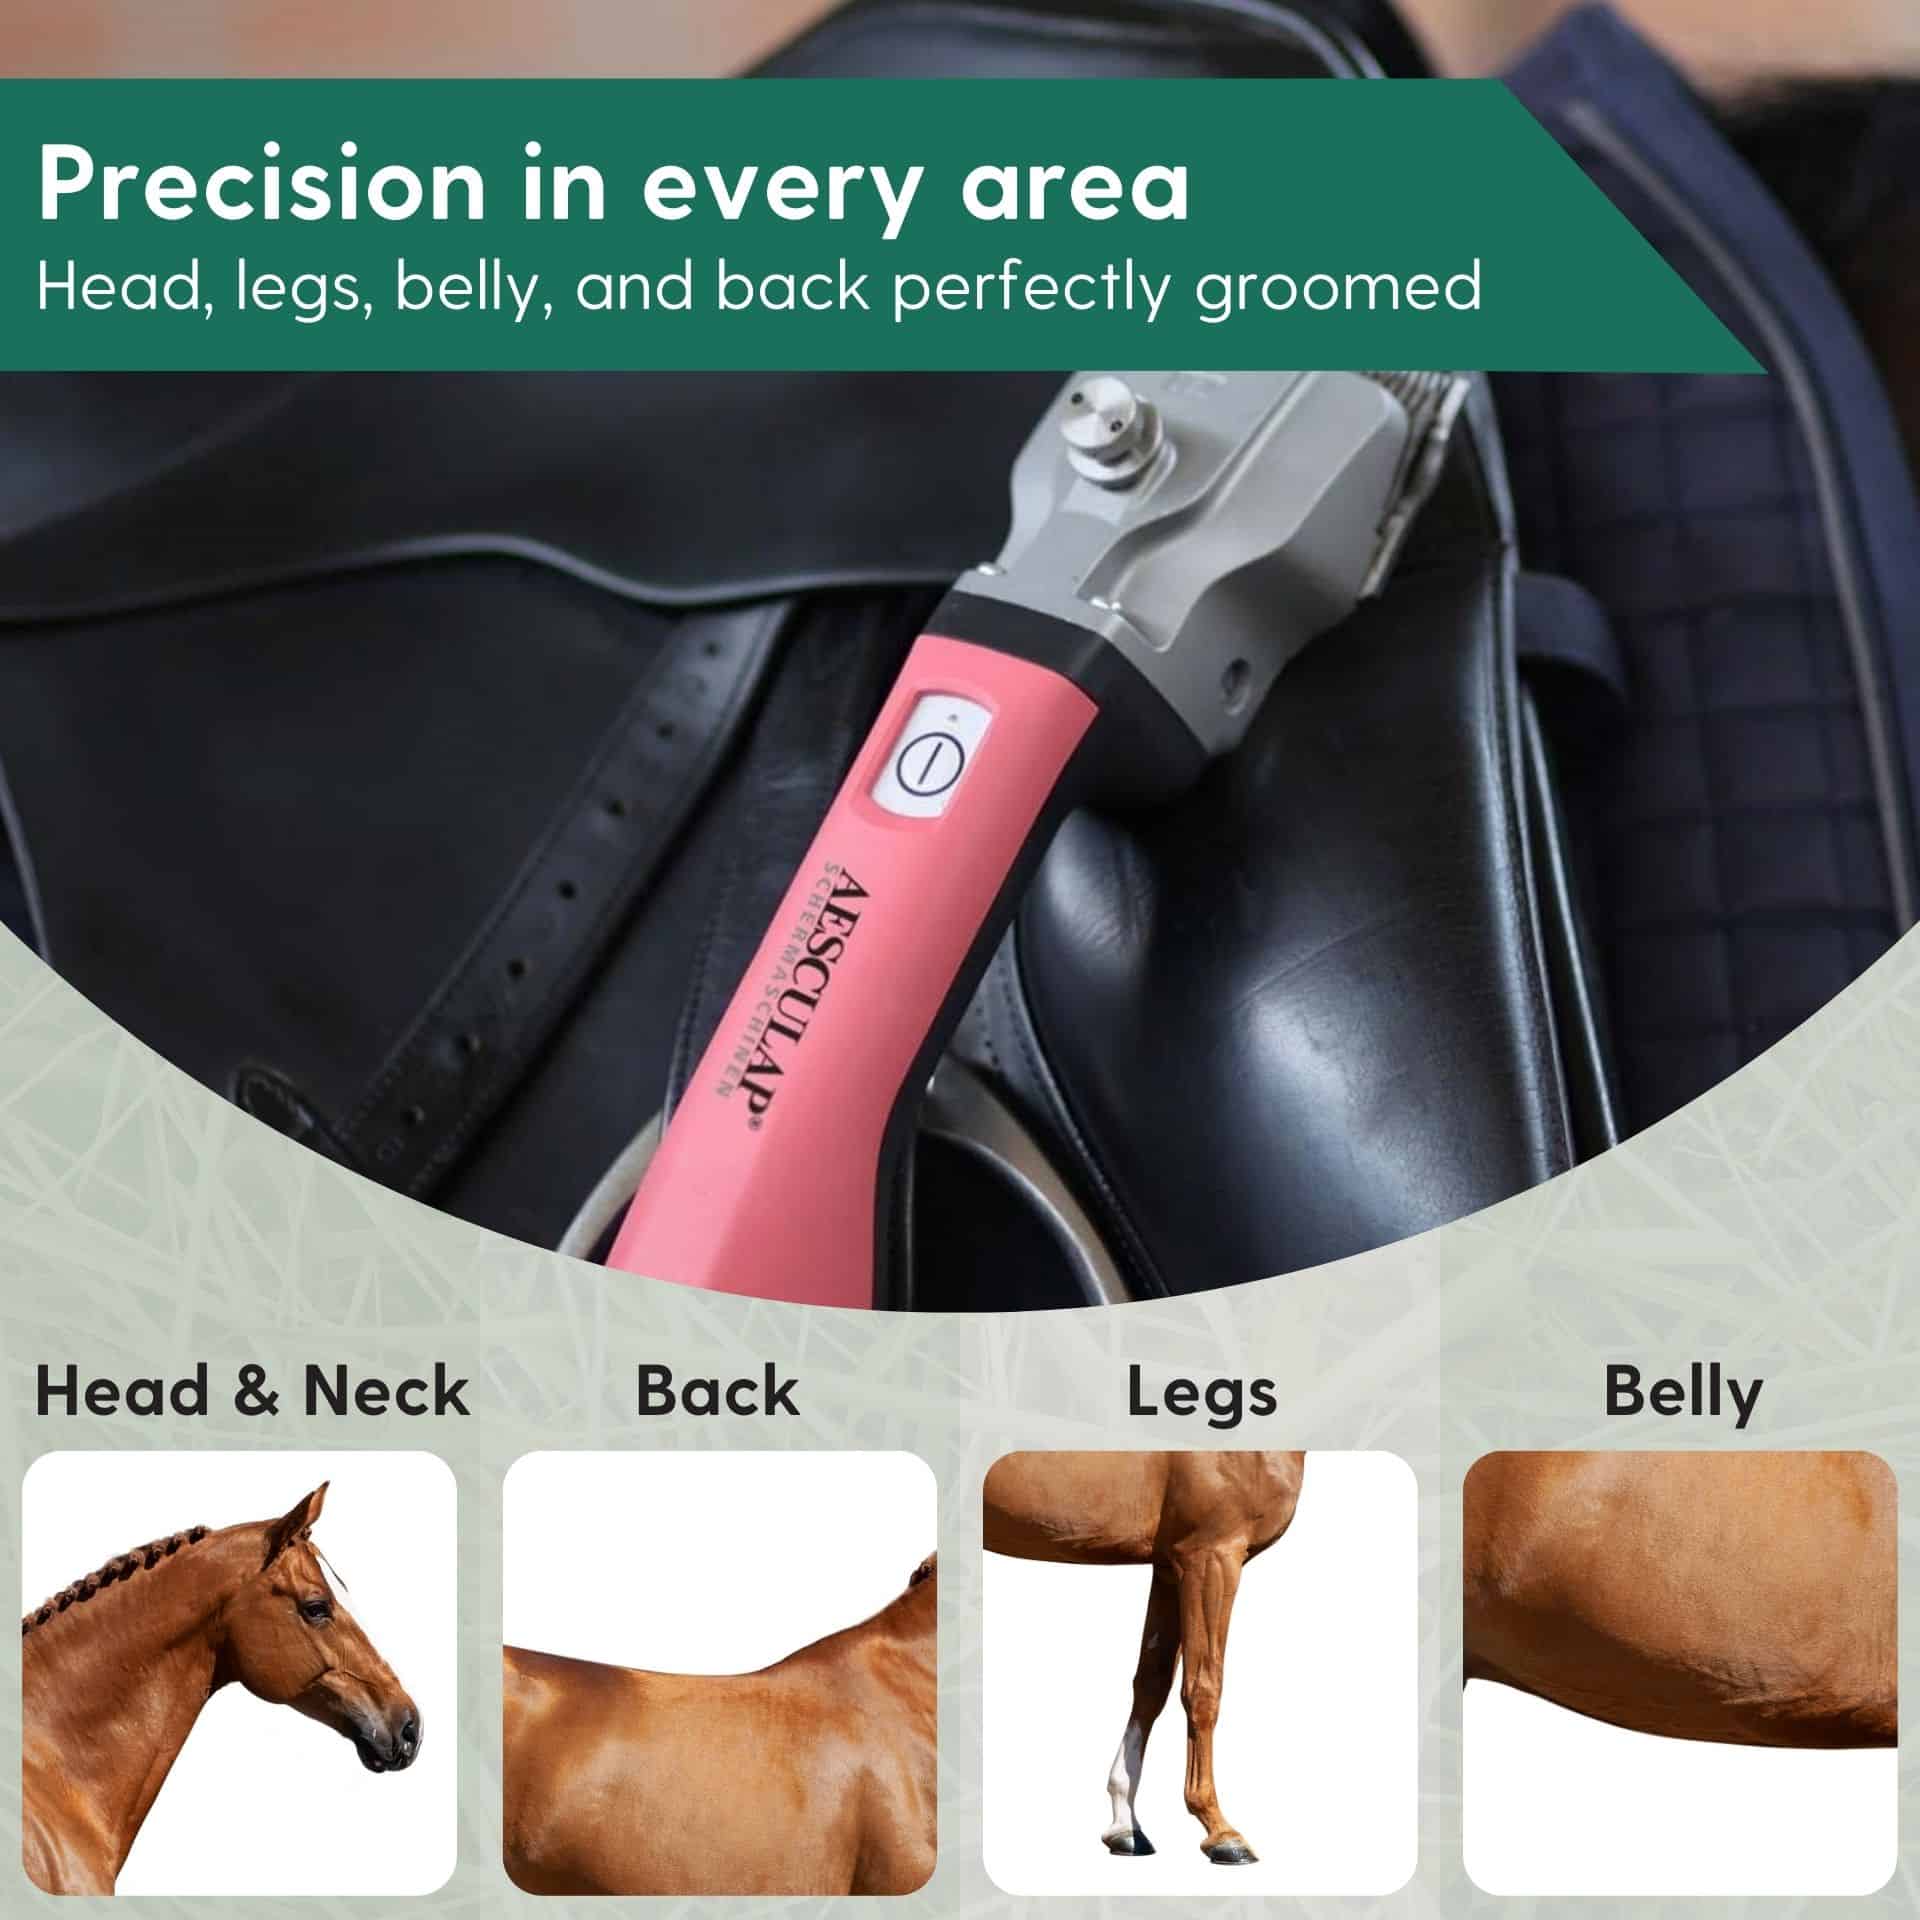 Aesculap Bonum Horse Clipper pink battery + FREE adjustment aid 1x Battery